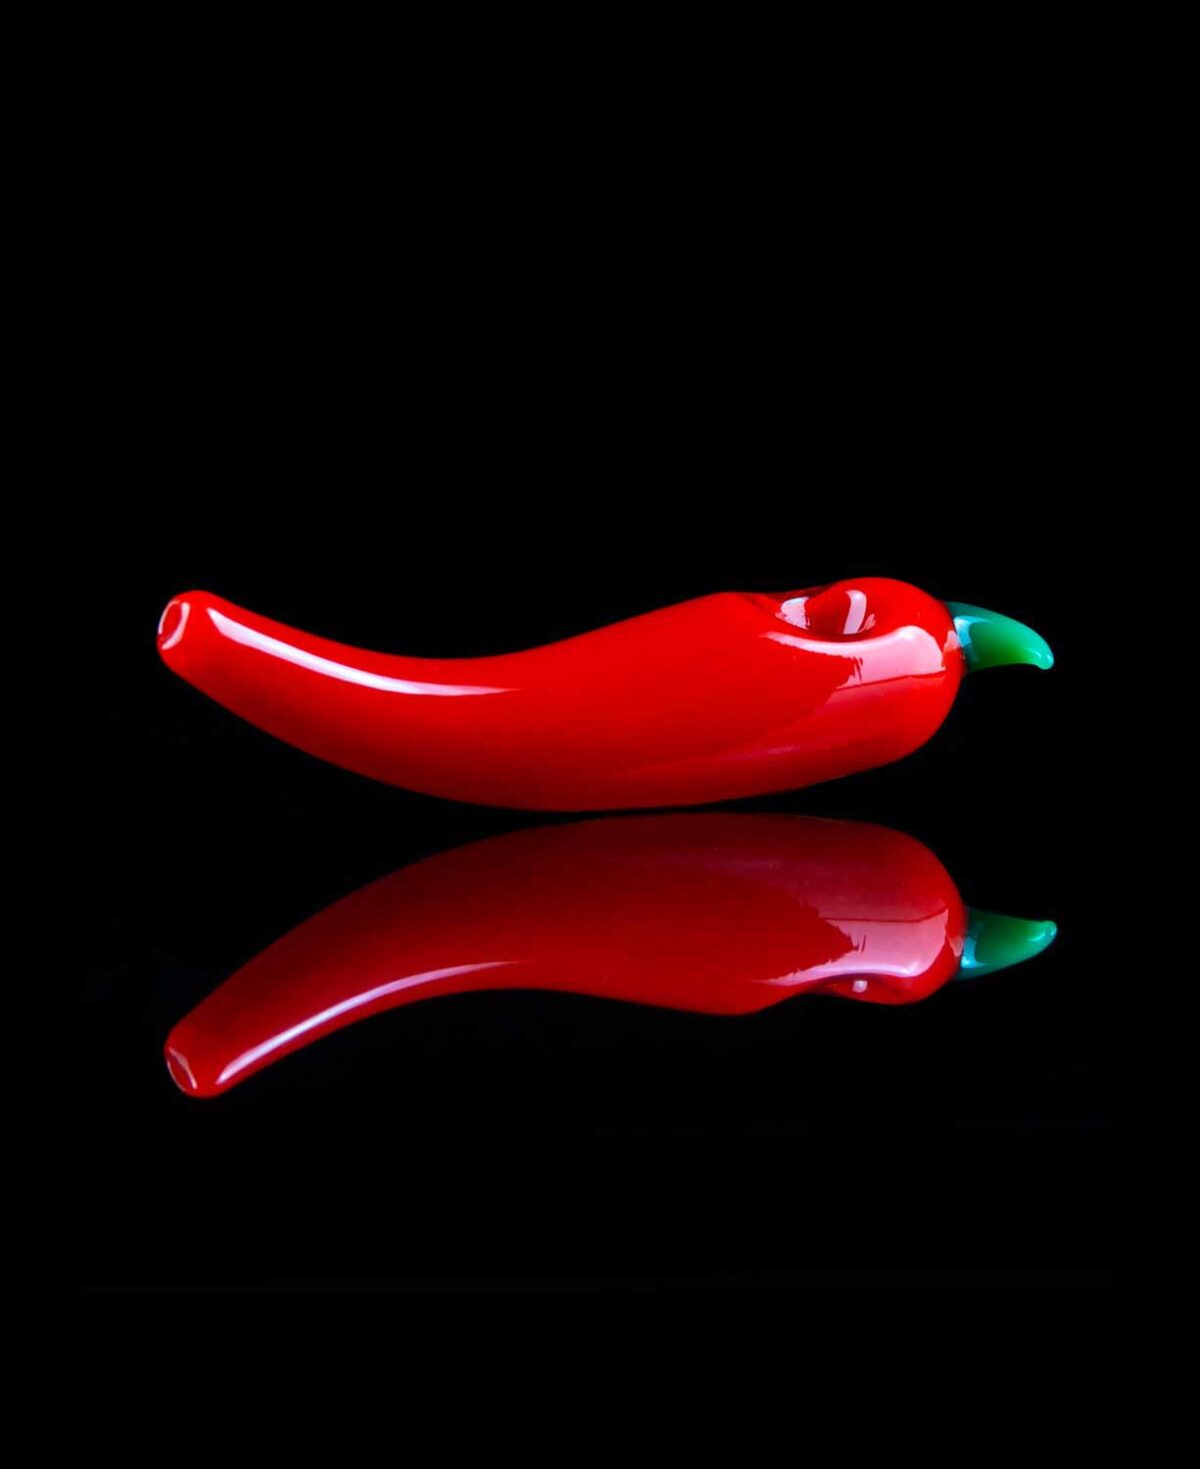 chili pepper pipe with reflection on table